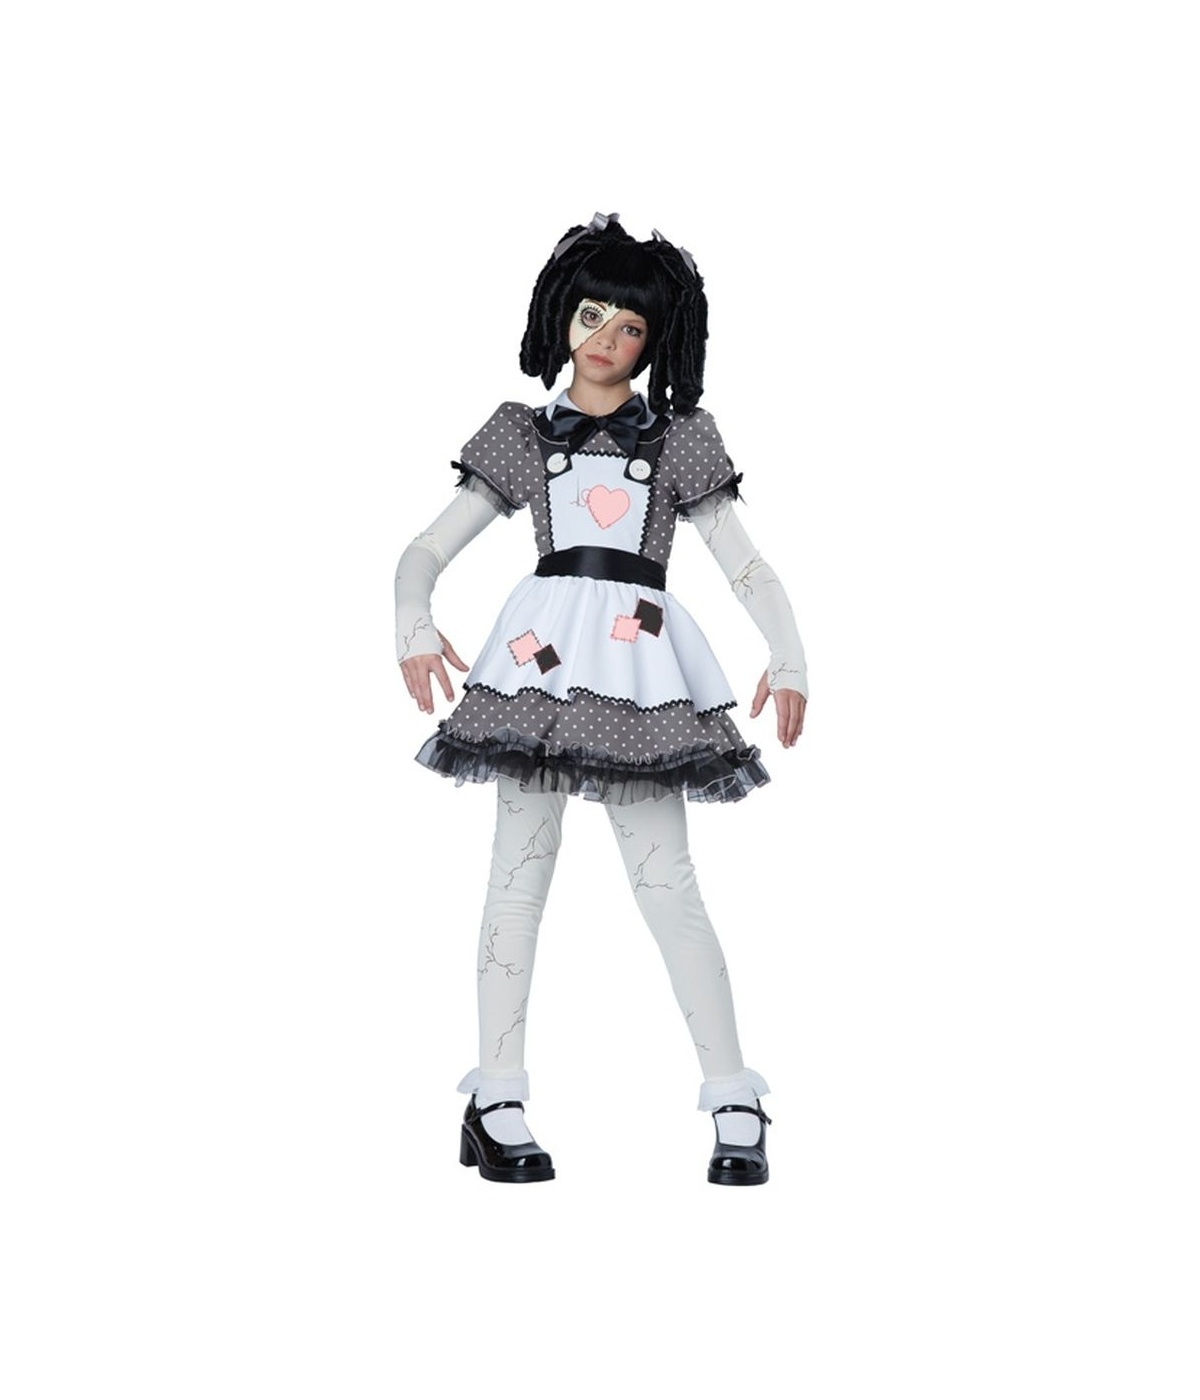  Girls Spooky Haunted Doll Costume